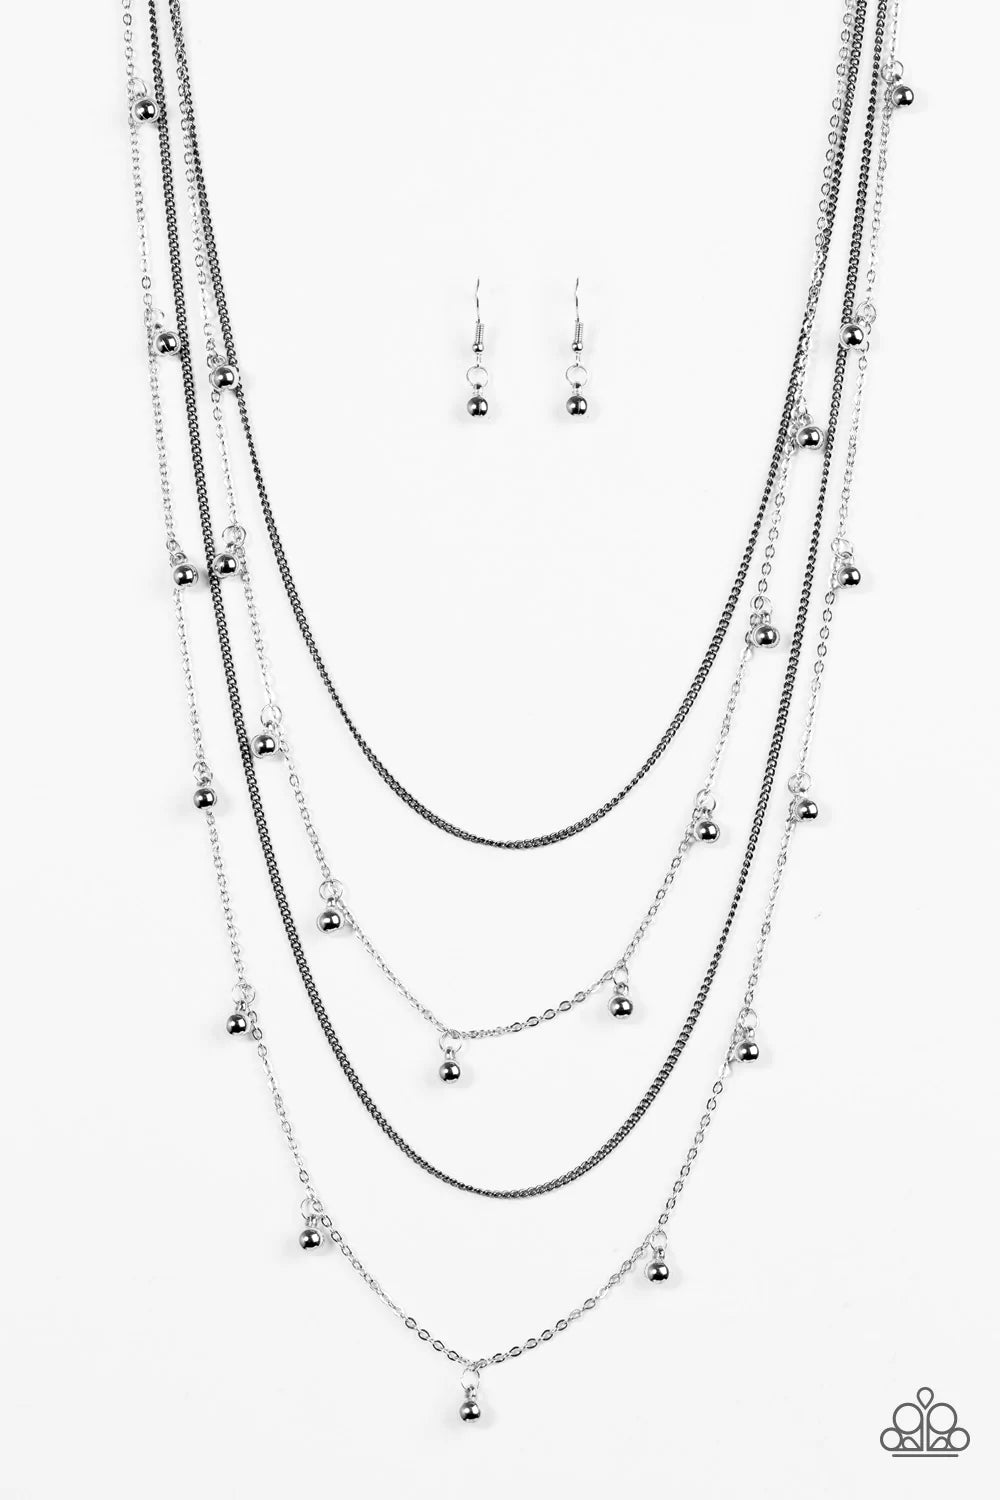 Paparazzi Necklace ~ Come Out and SLAY - Silver